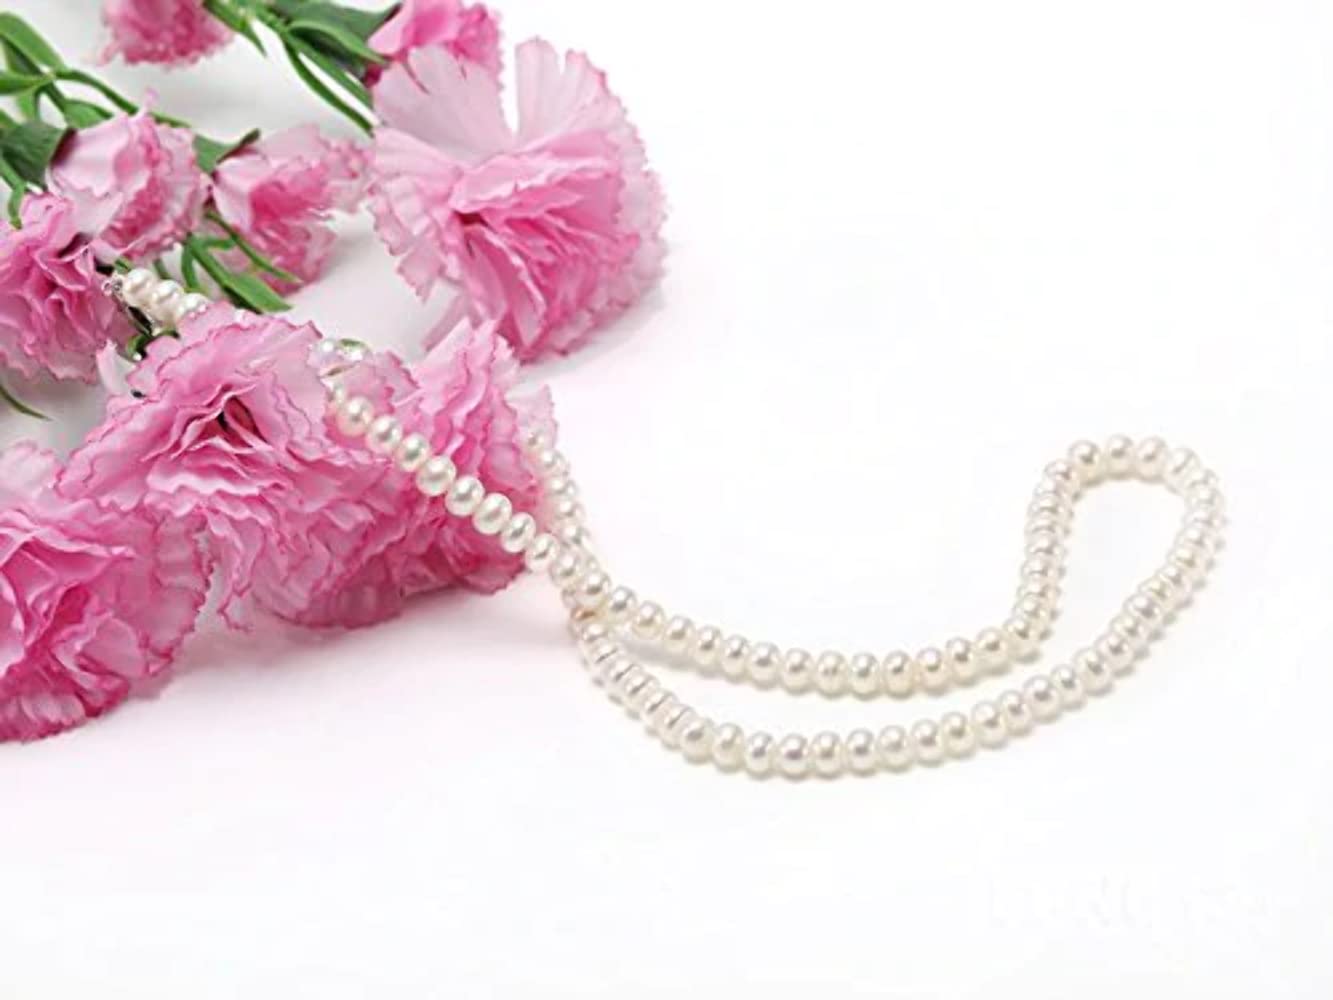 JYX Pearl Choker Necklace Small White 5mm Cultured Freshwater Pearl Necklace for Women 16